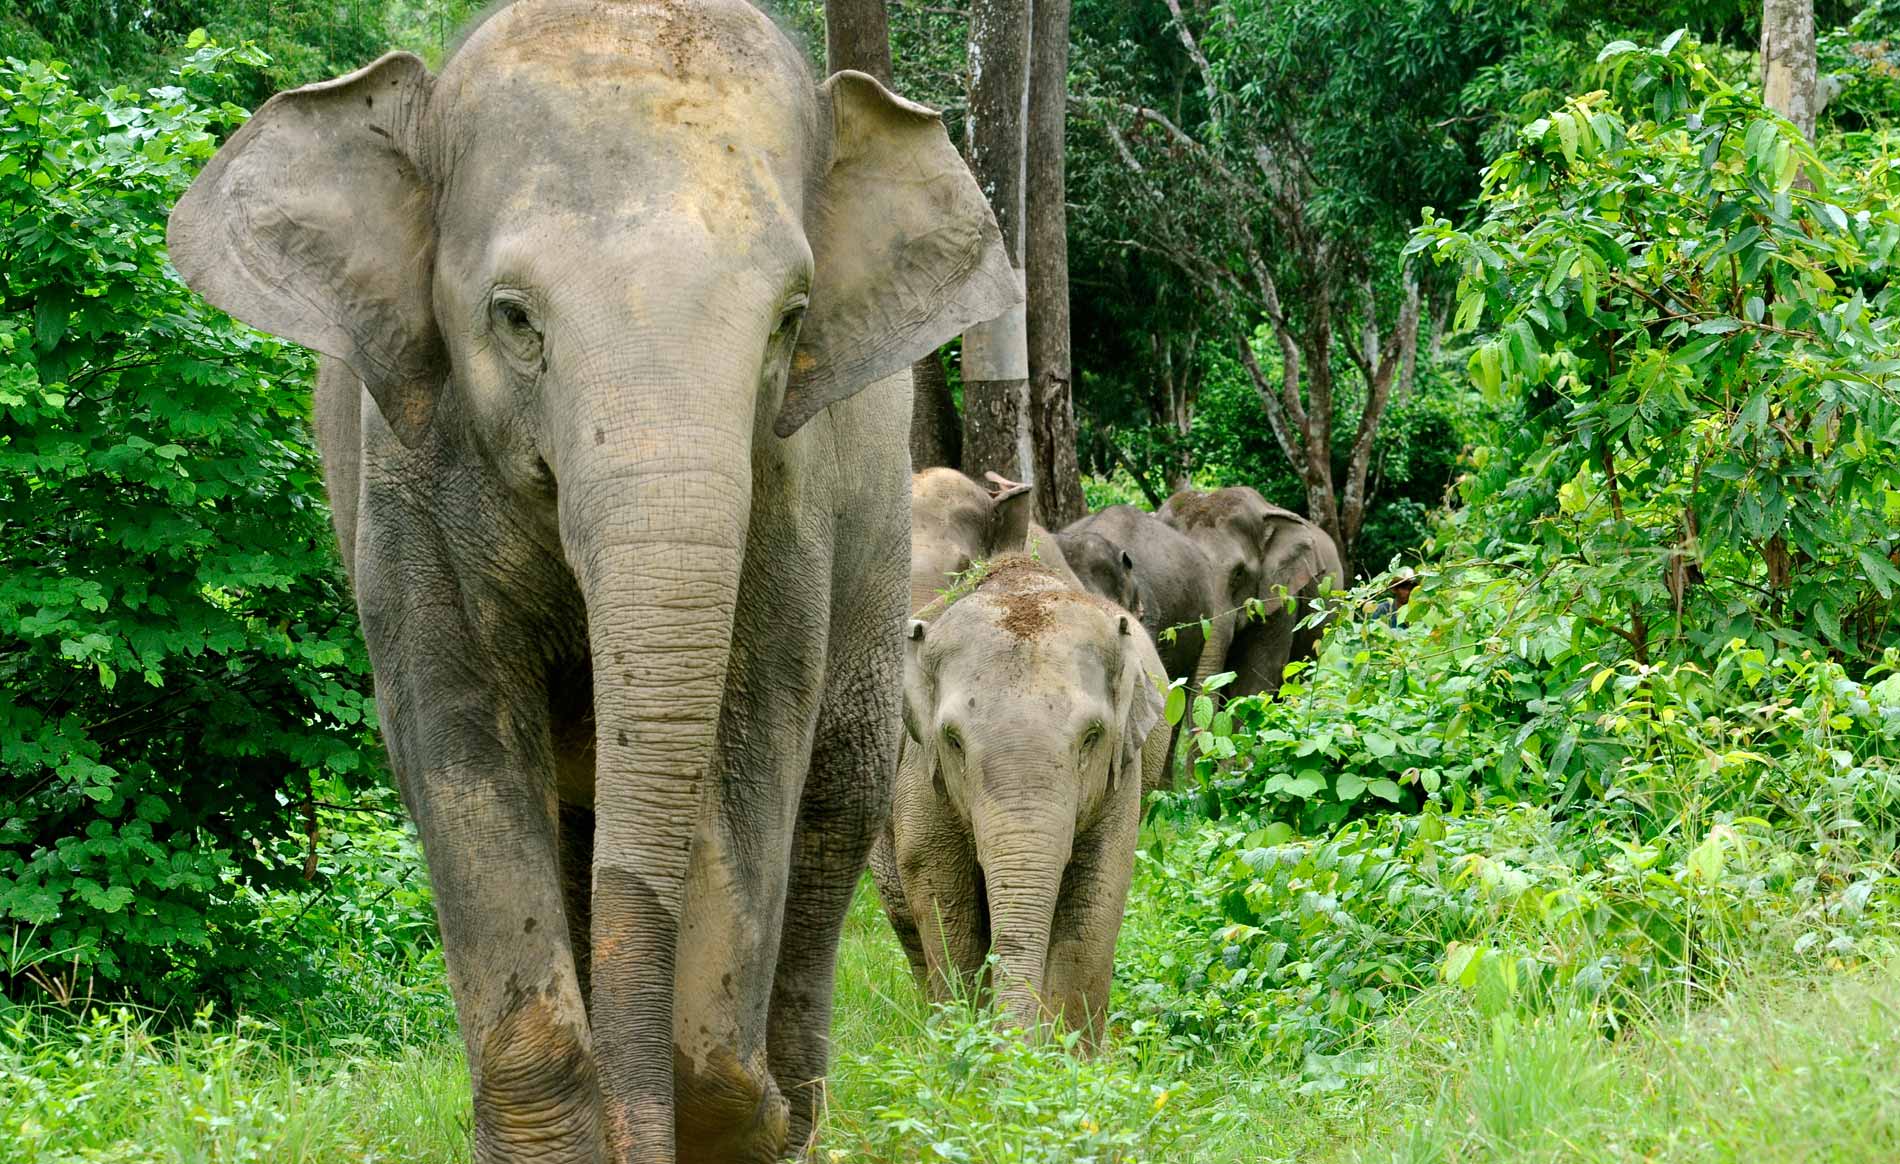 Female elephants are highly social animals who thrive in herds.